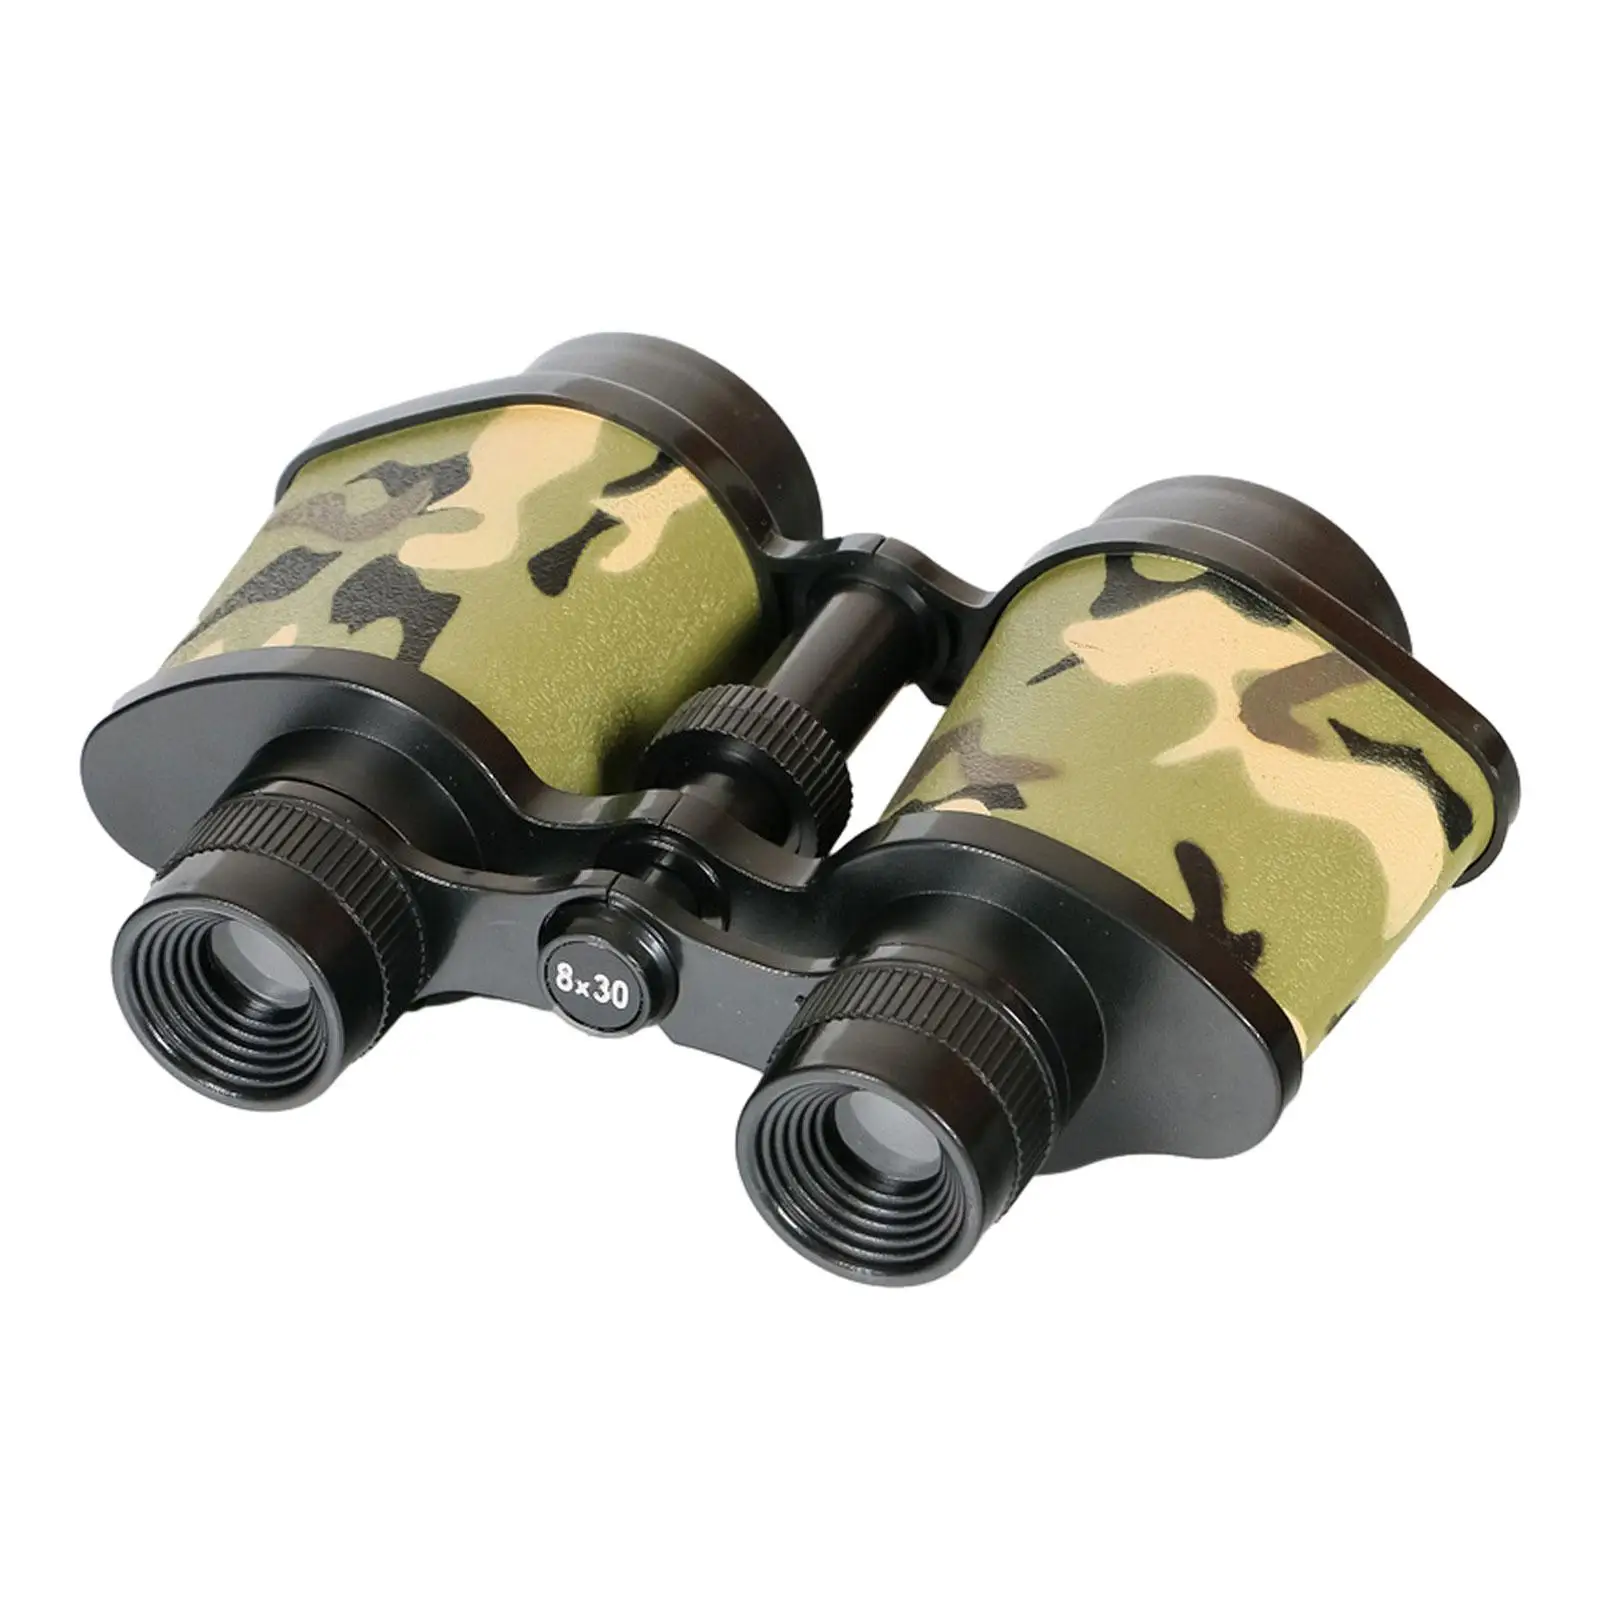 Kids Binoculars Toy 8x30 Portable Educational Children Magnification Toy for Exploration Hunting Party Favors Birthday Sports